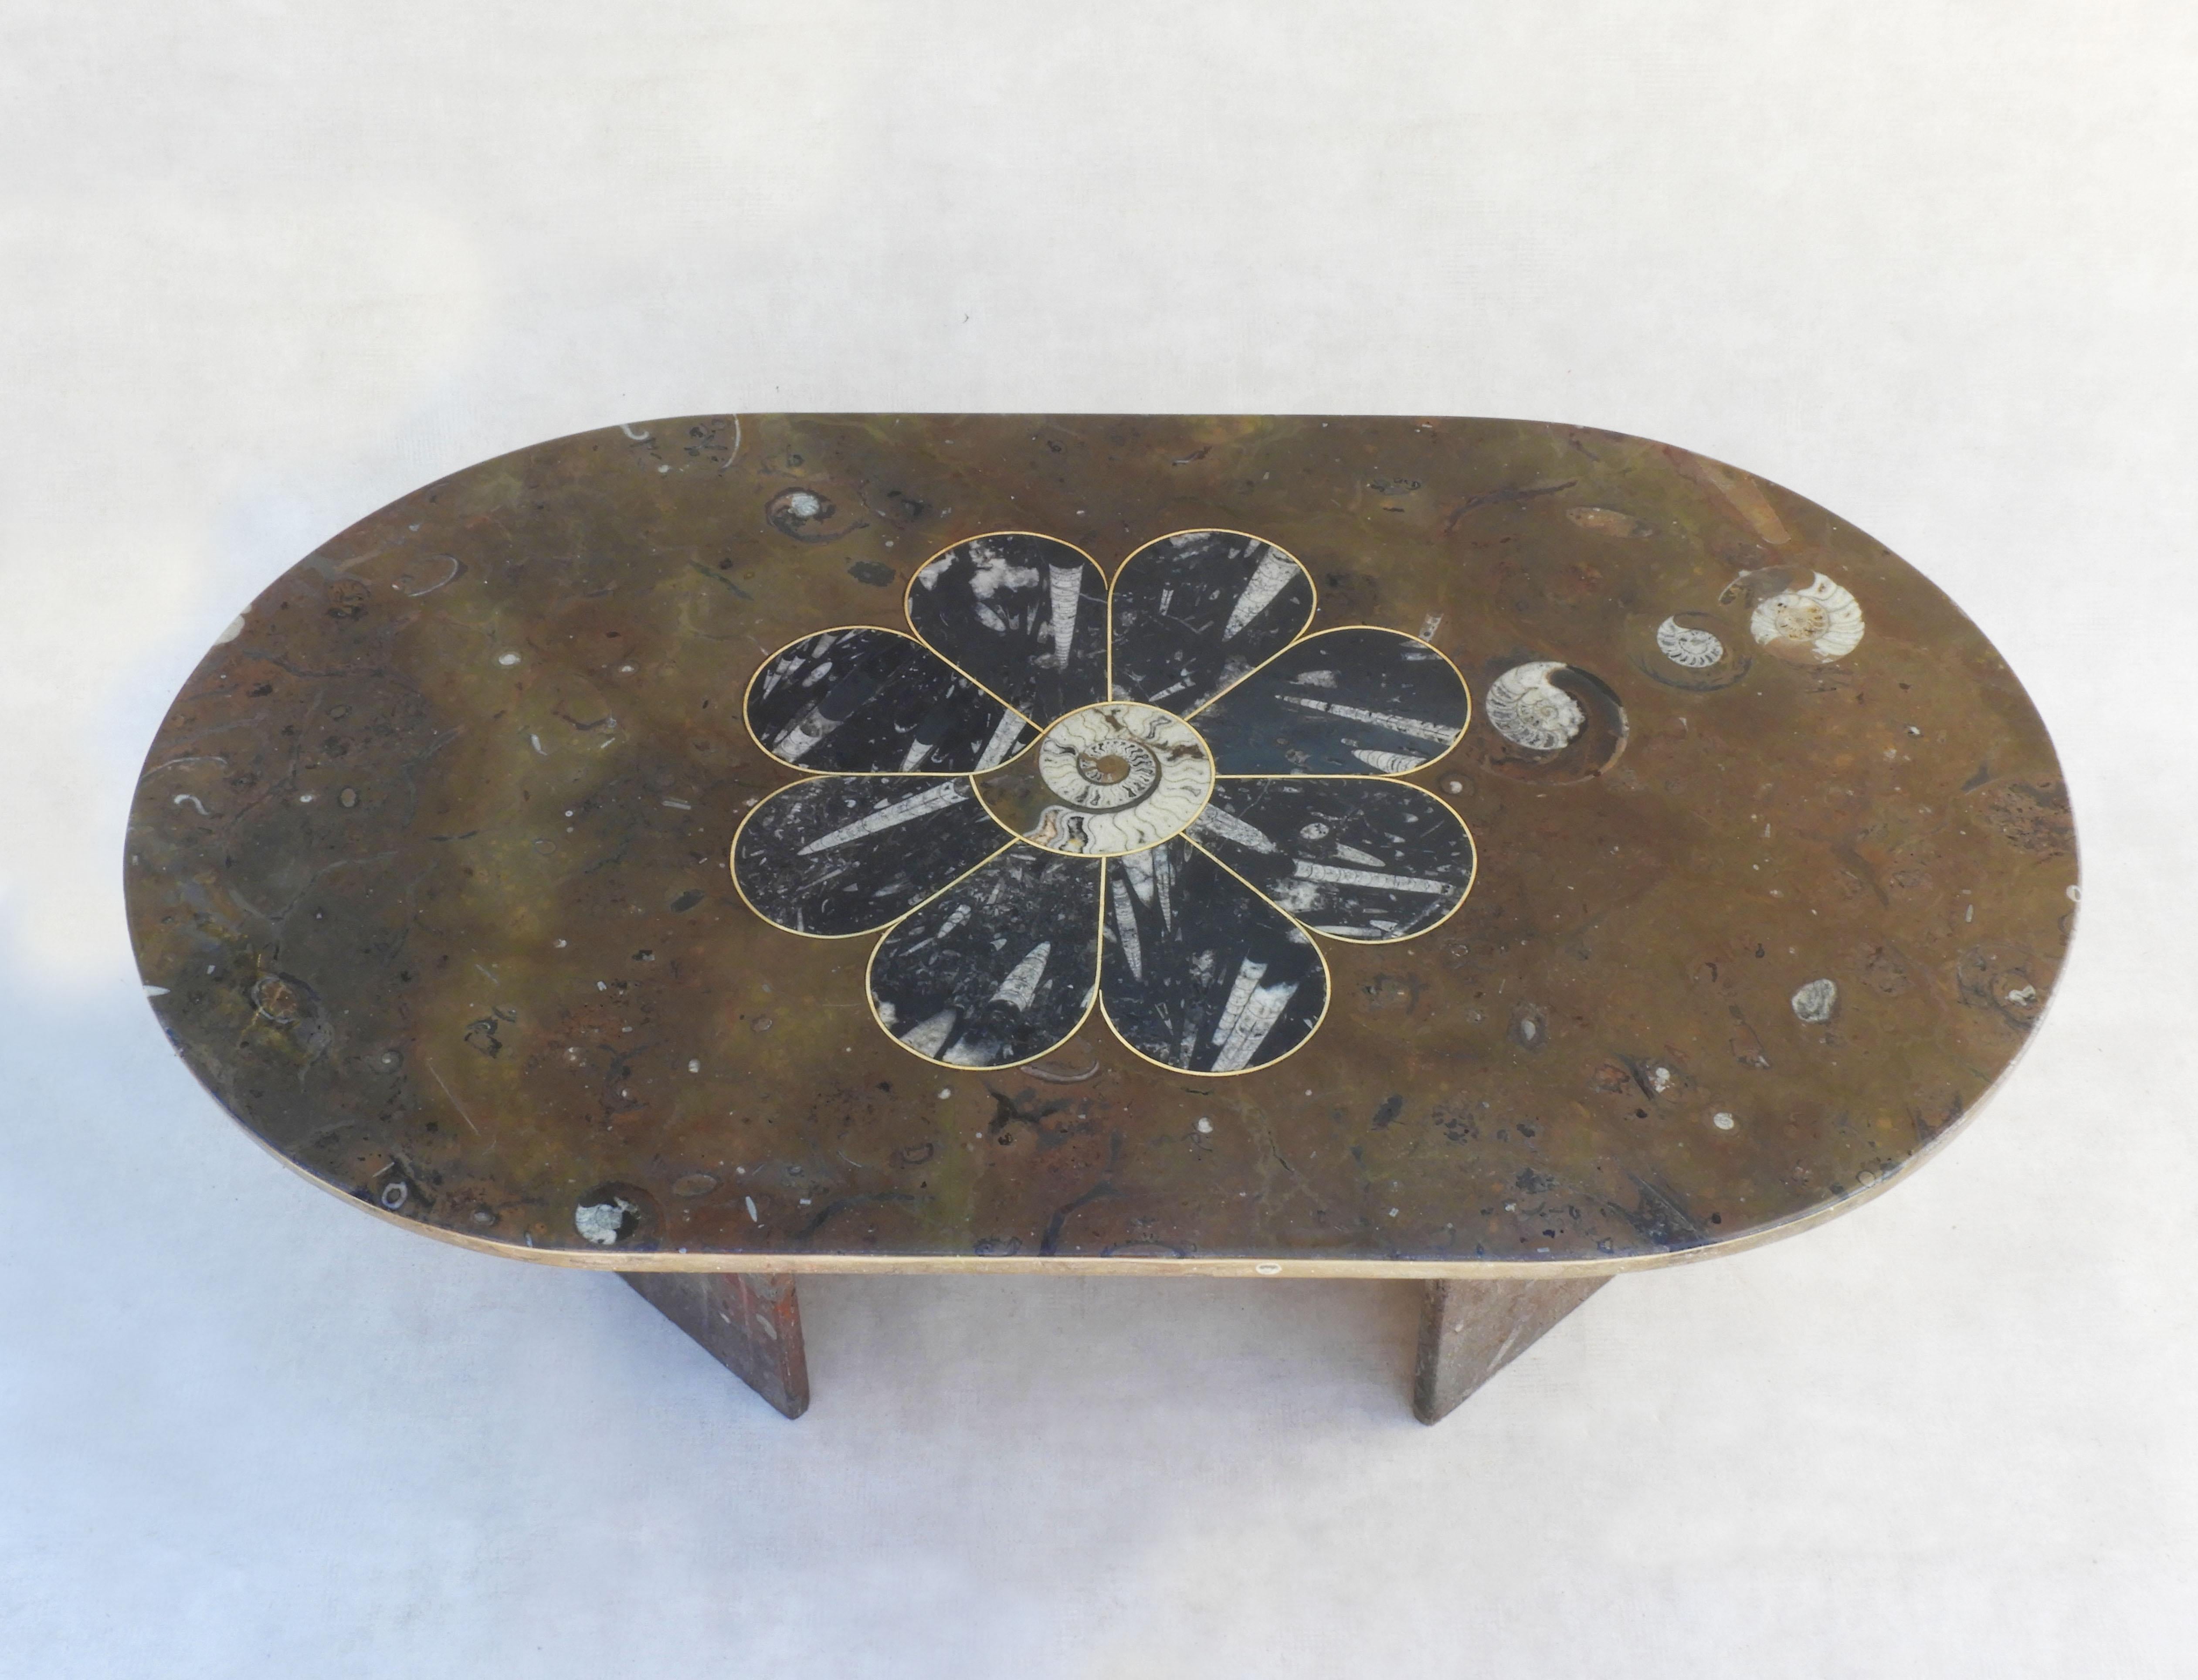 French Mid Century Ammonite and Orthoceras Fossil Marble Coffee Table C1970s France For Sale